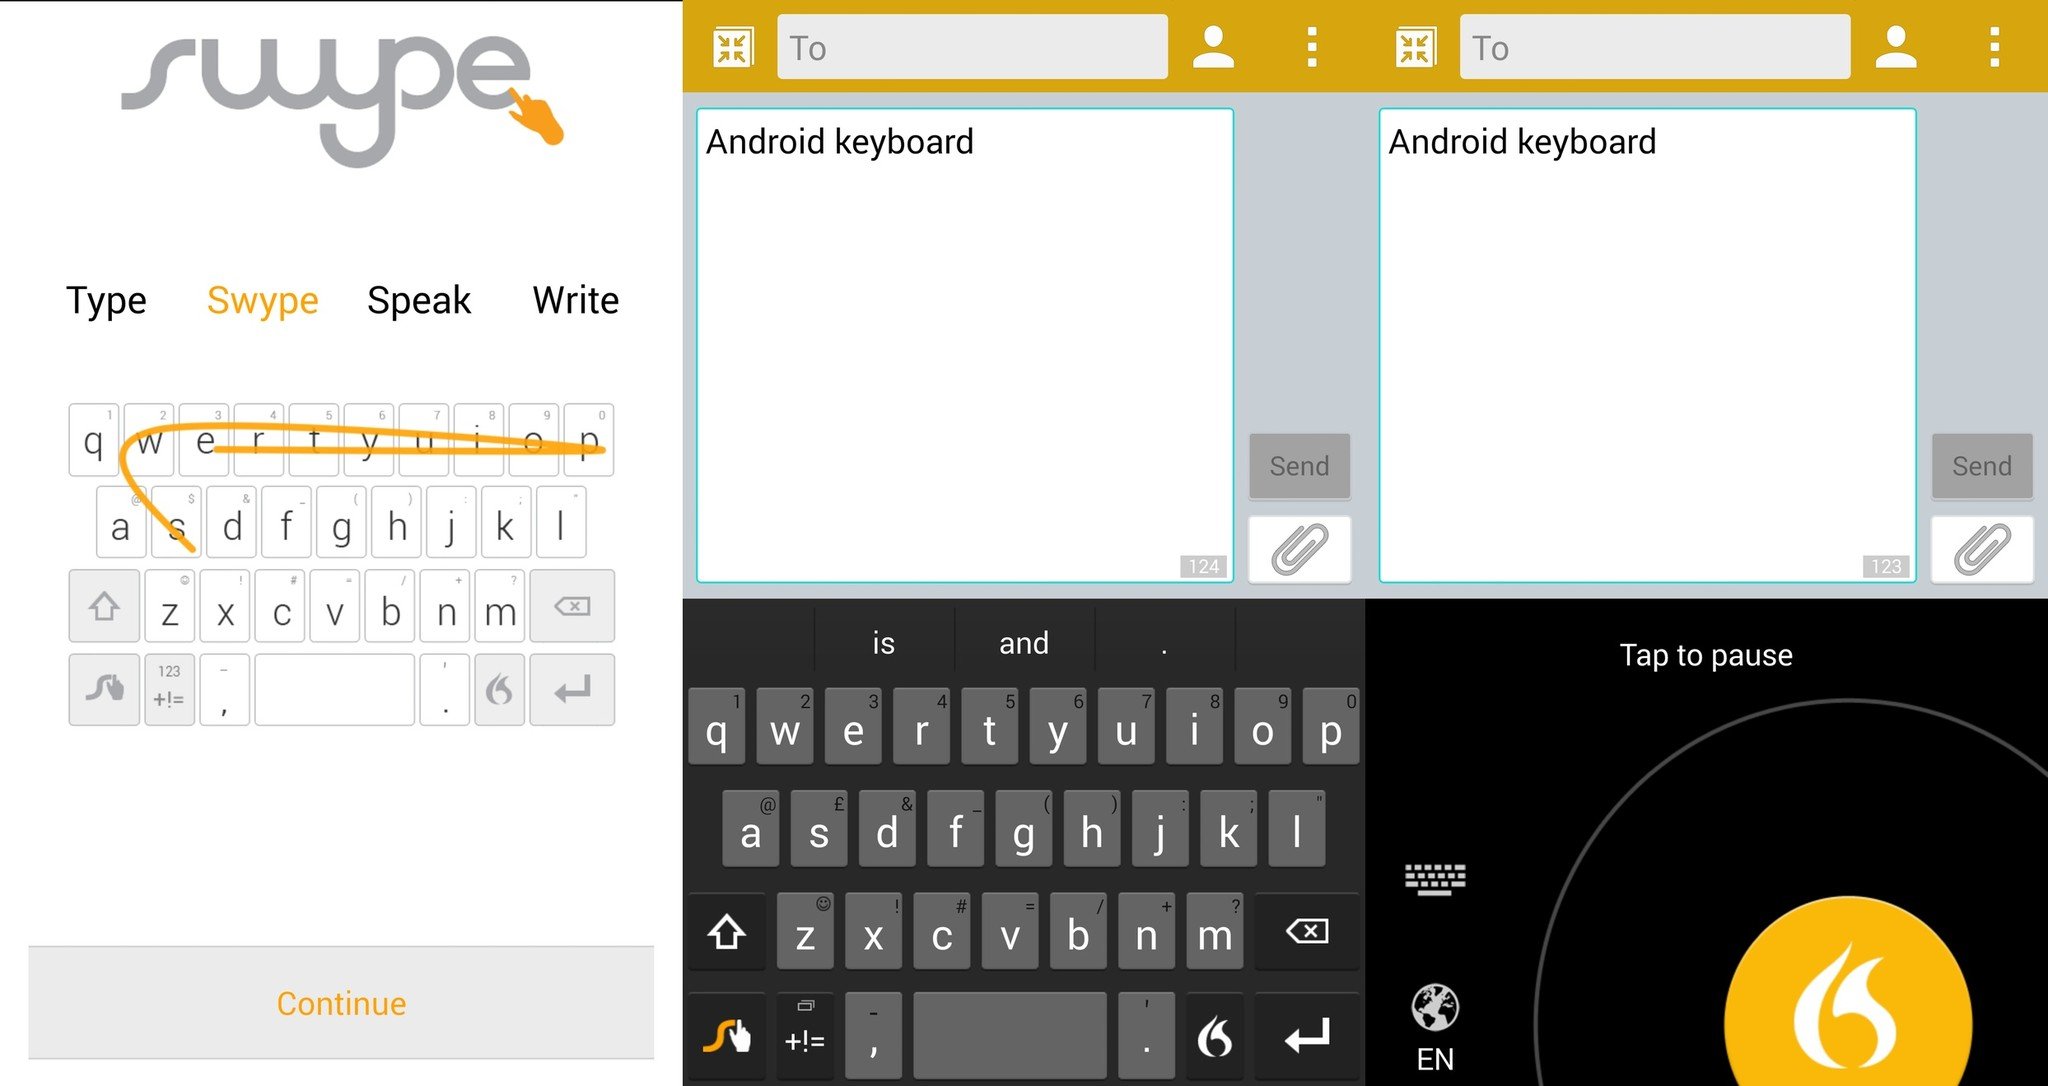 Top 5 android keyboards Swype_keyboard_screens